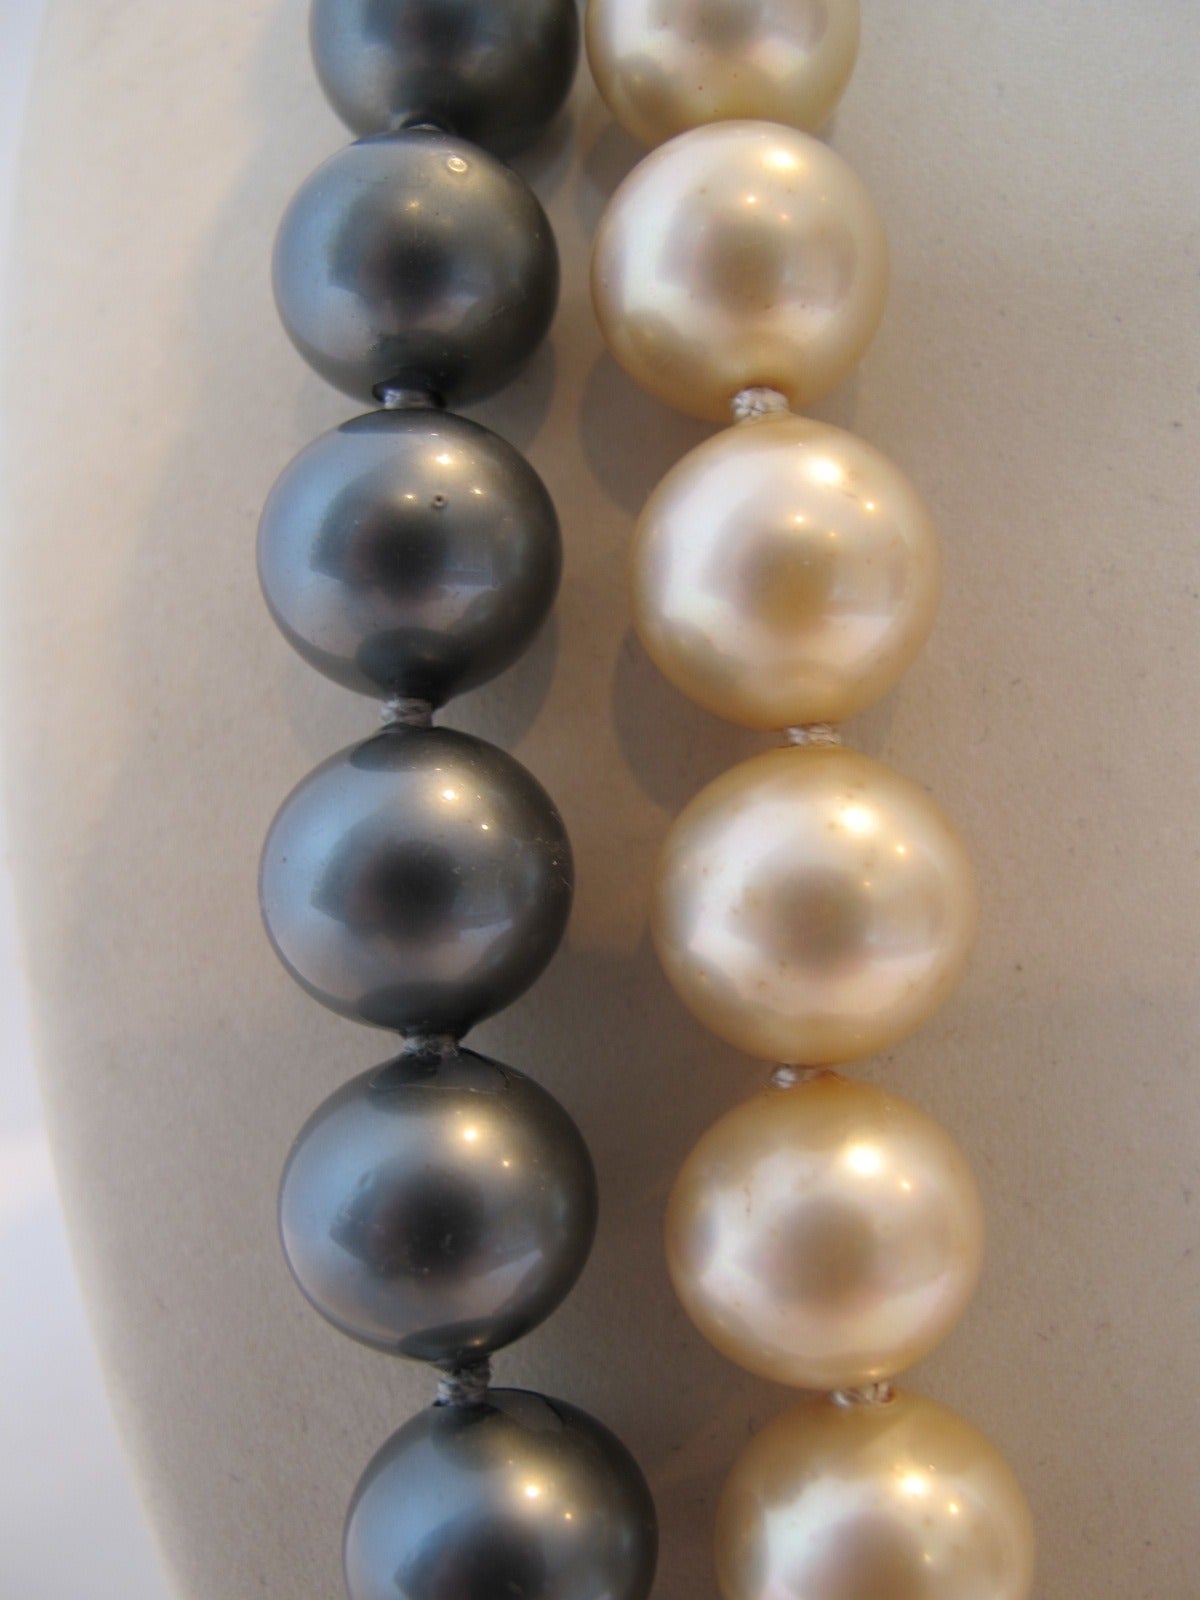 Fabulous K.J.L. (Kenneth Jay Lane) double strand imitation black and cream South Sea Pearl necklace. The cream necklace is 25 inches including closure. the black necklace is 28 inches including closure. 41 cream pearls and 45 black pearls. The